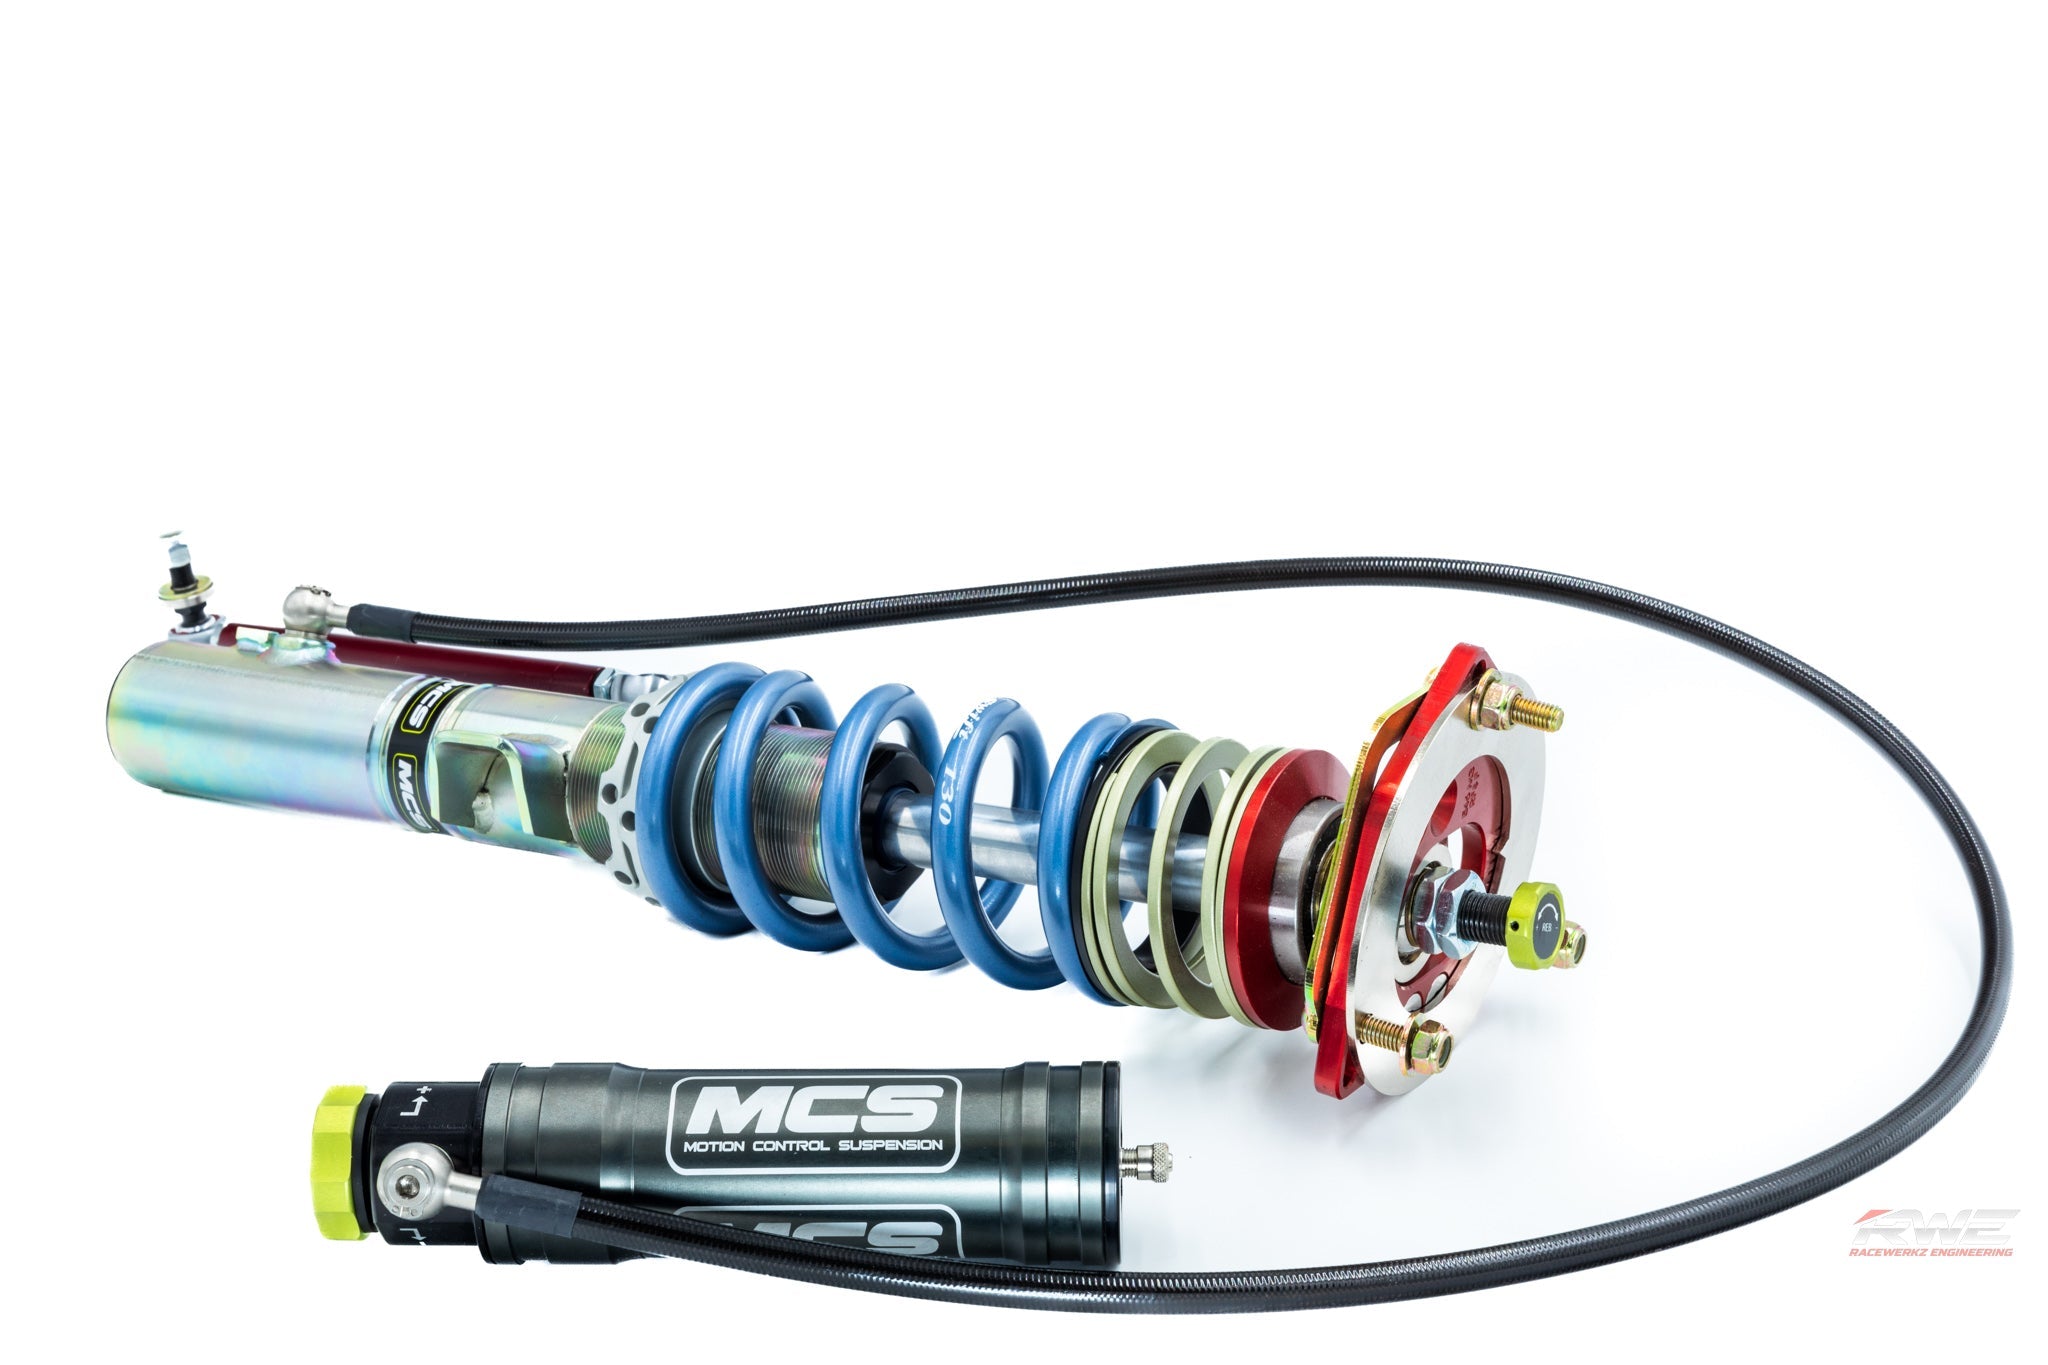 Coilovers - High Quality Suspension for Use Both On and Off the Track